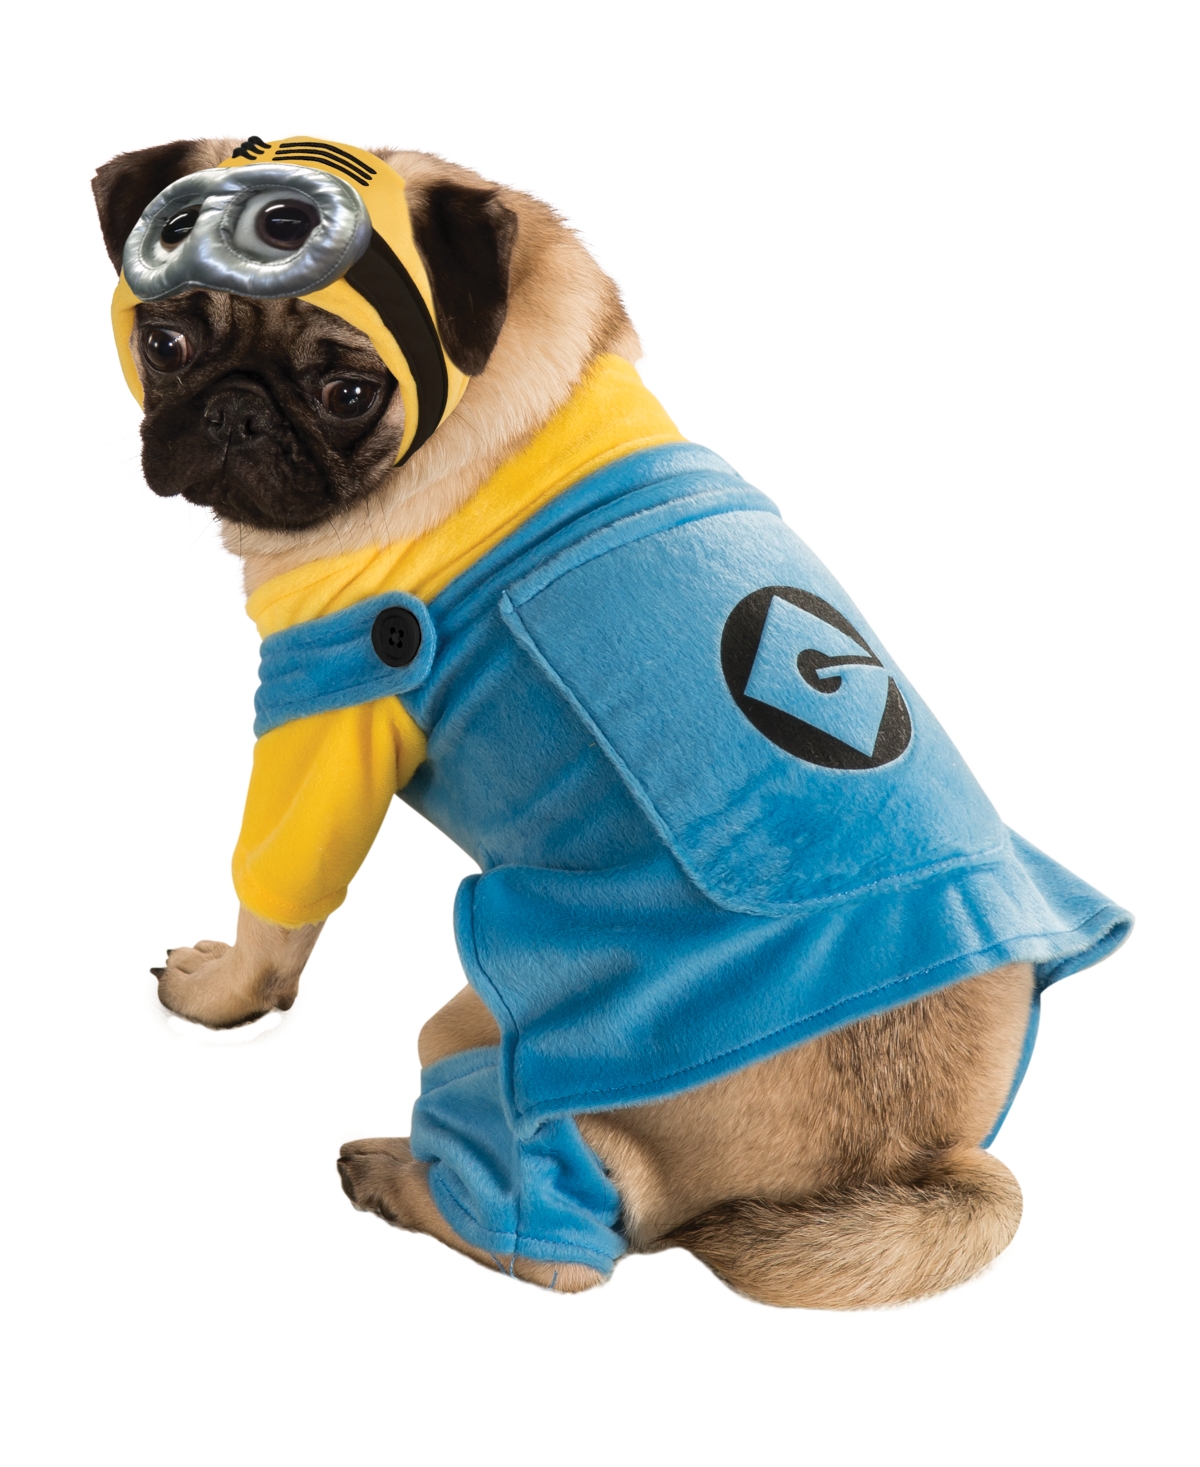 Rubies Pet Shop Boutique Dog Costumes: Minion (Size S & M) $6.65, Wonder Woman Cape (Size S) $5.60 & More + Free Store Pickup at Macy's or FS on $25+